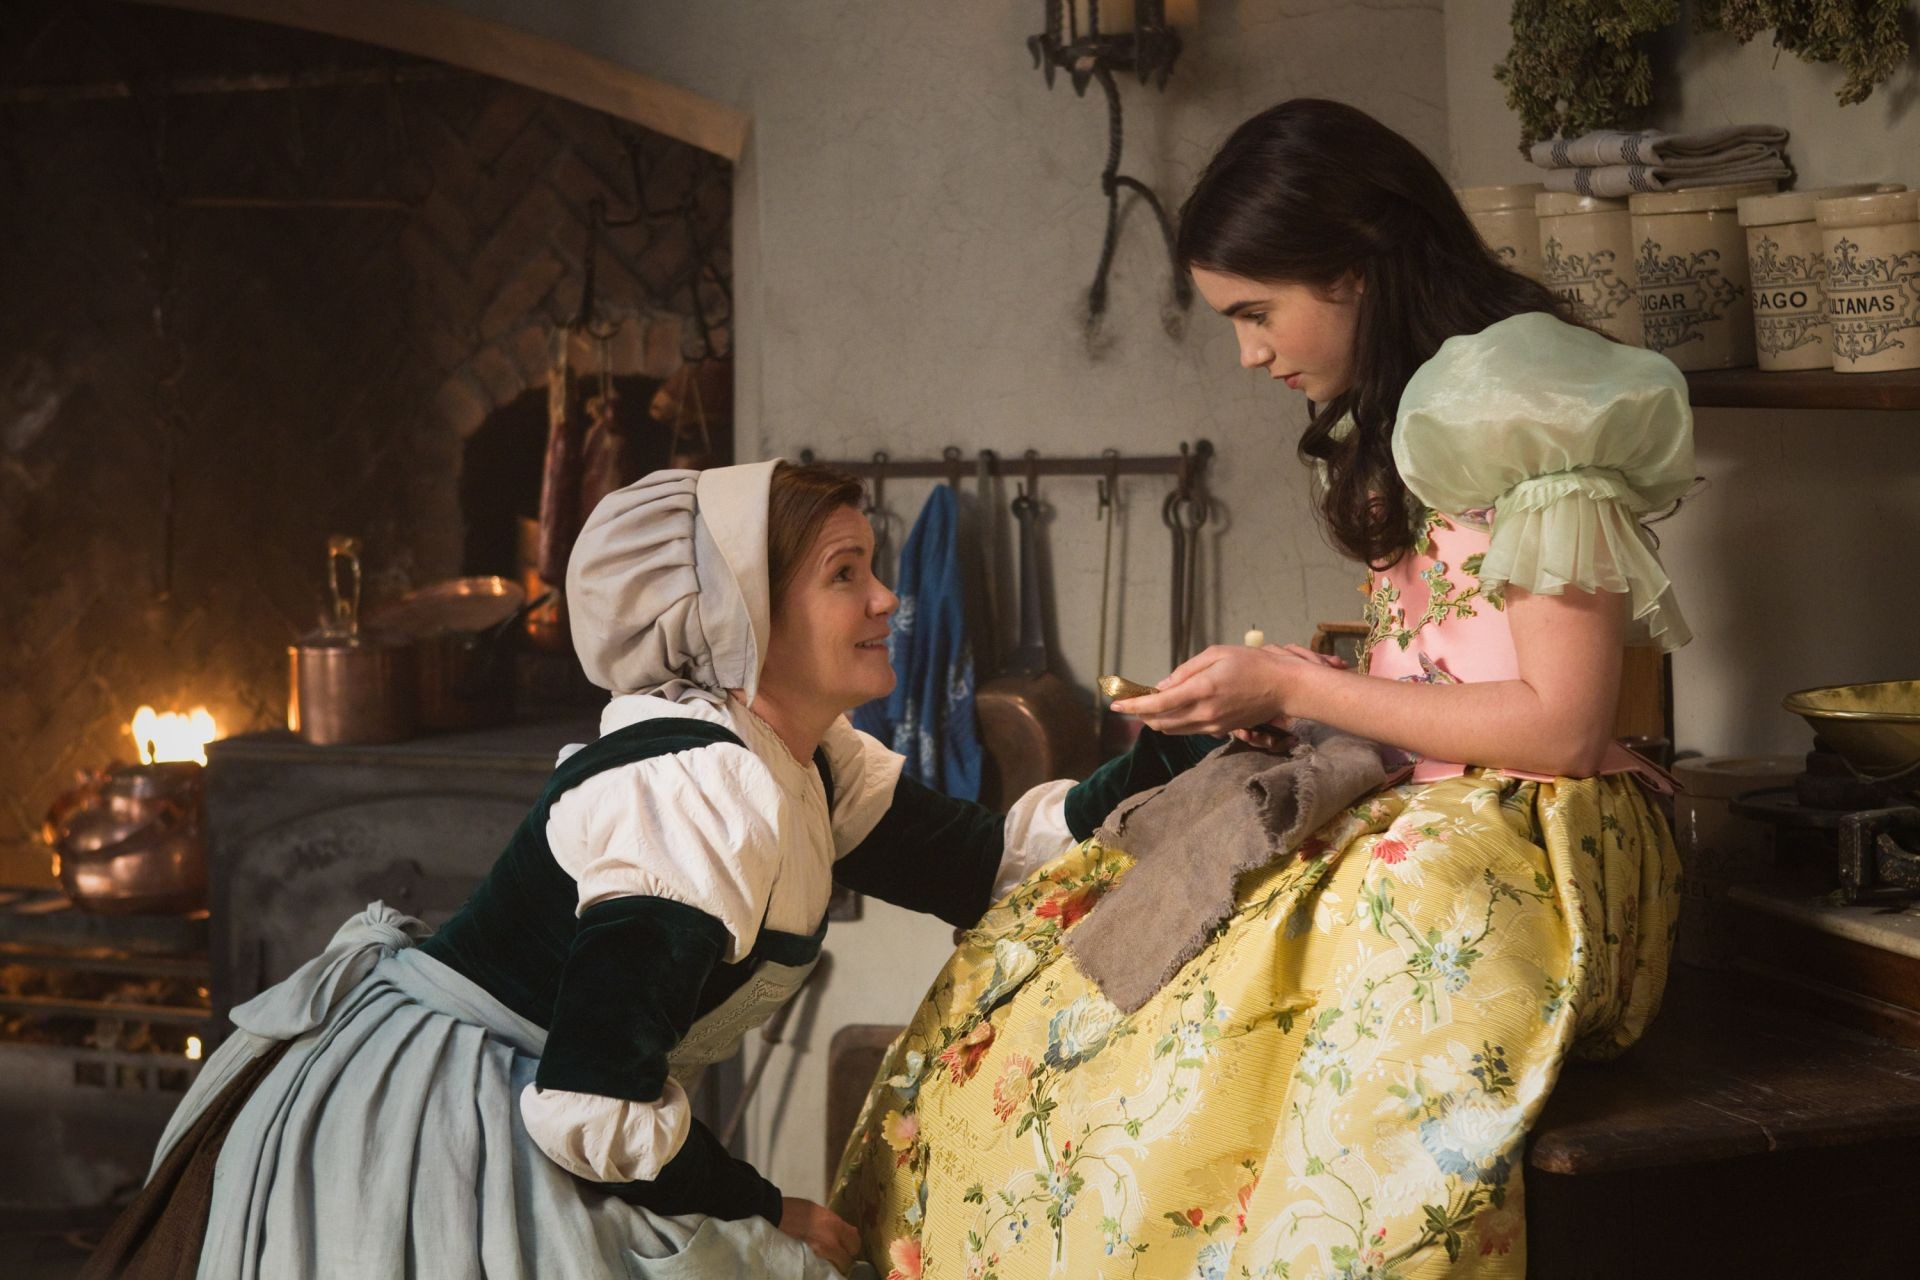 Mare Winningham stars as Baker Margaret and Lily Collins stars as Snow White in Relativity Media's Mirror Mirror (2012). Photo credit by Jan Thijs.